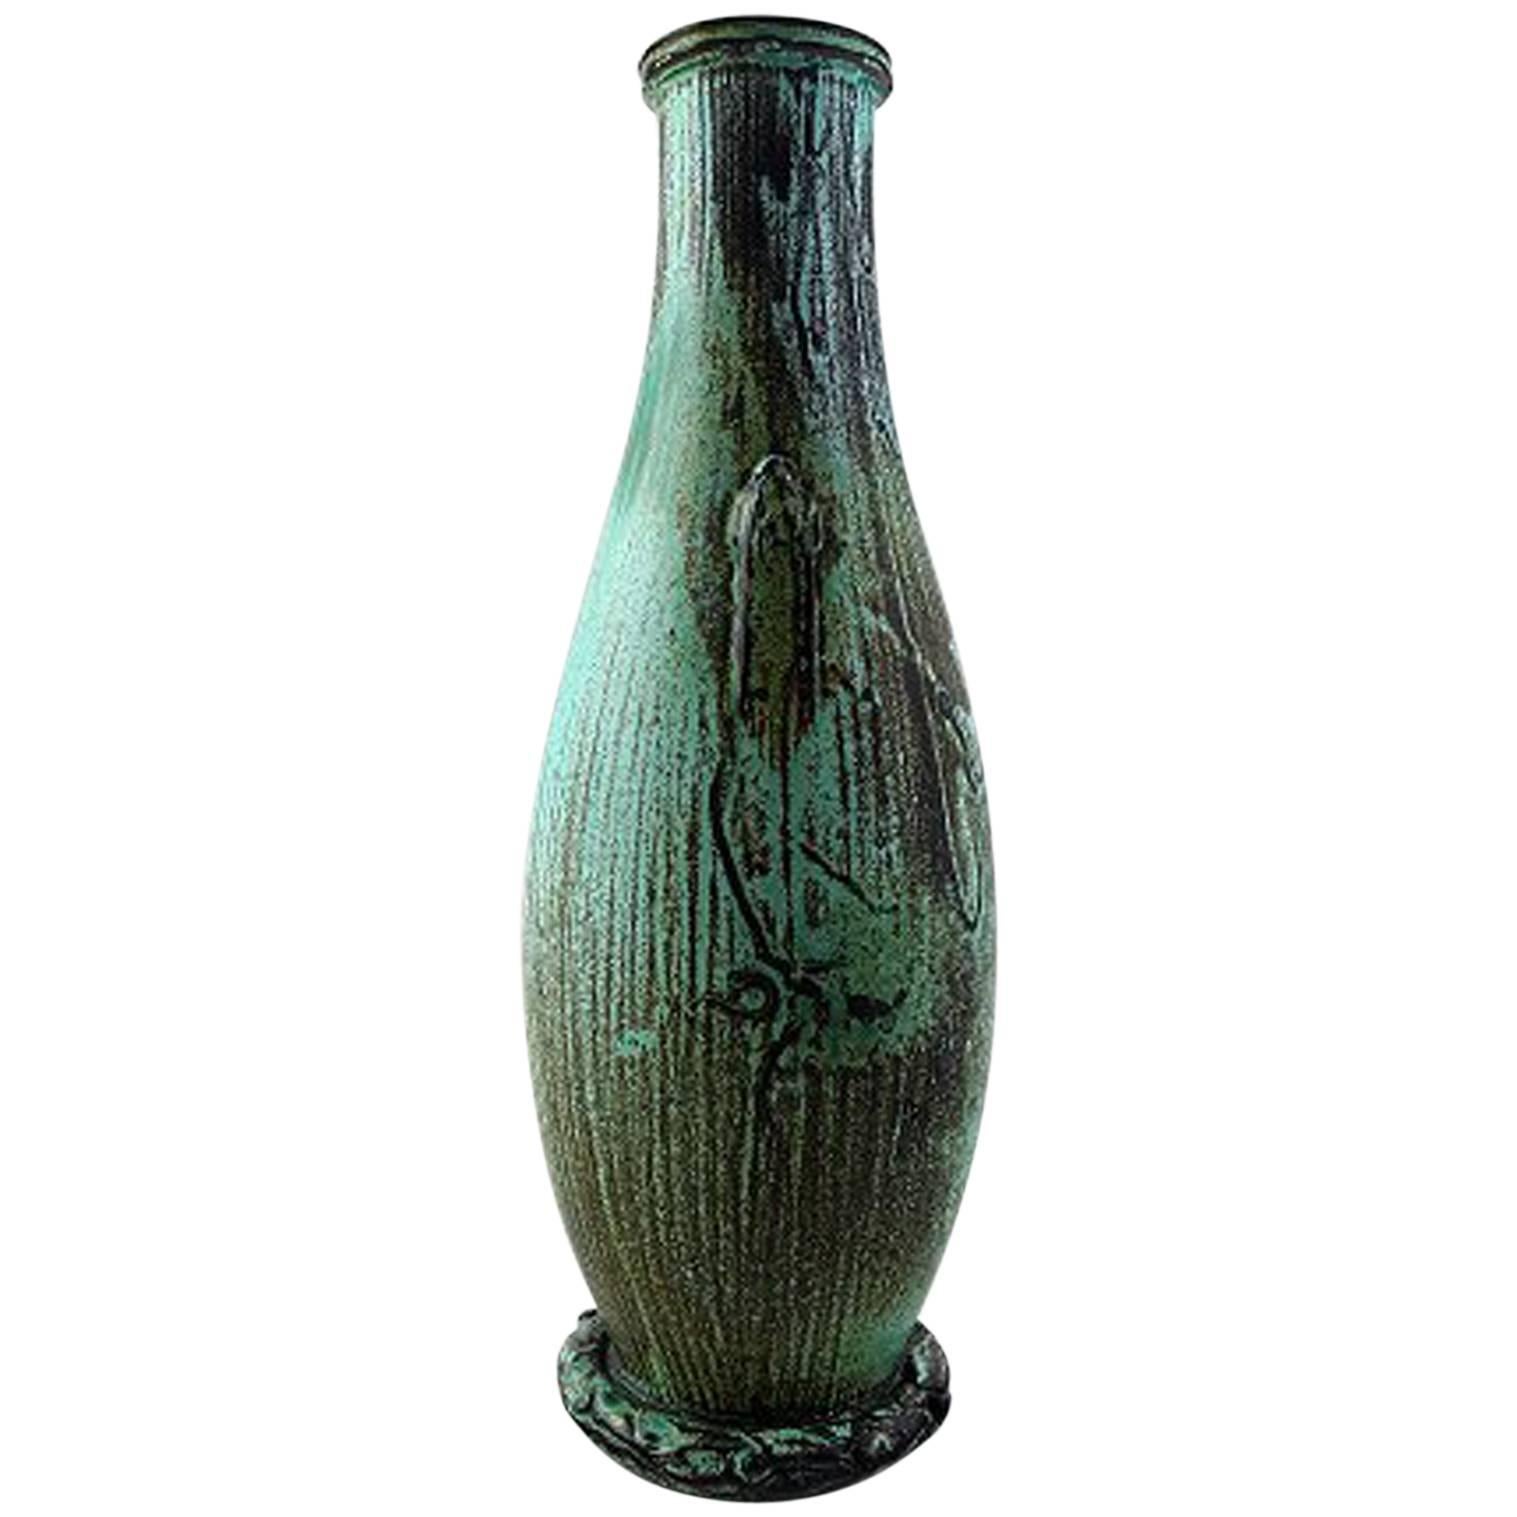 Svend Hammershøi a Tall Earthenware Vase Modelled with Two Stylized Handles